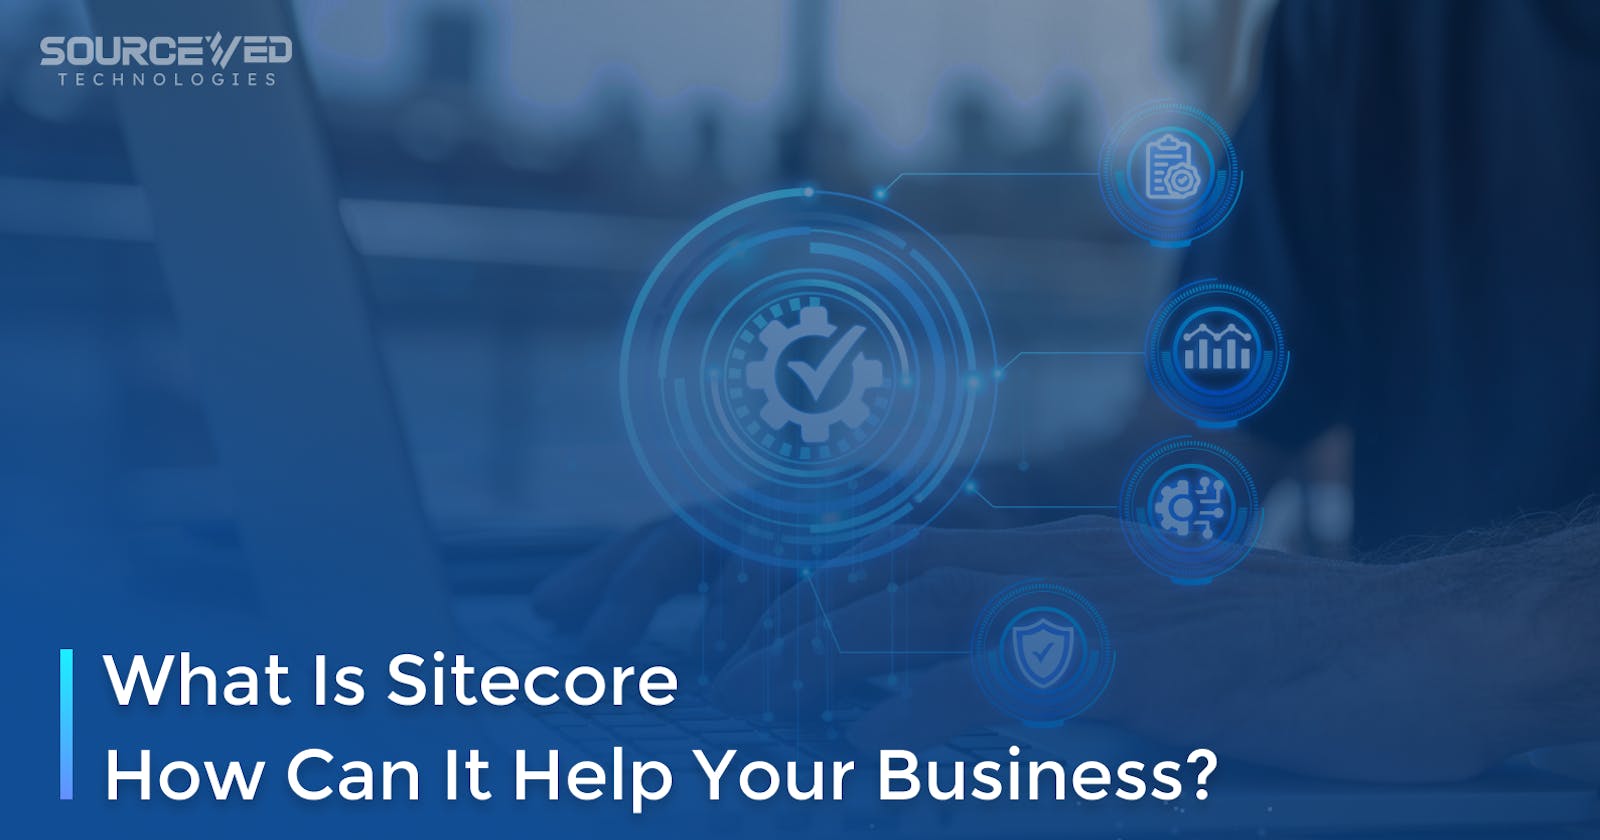 What is Sitecore how can it help your business?